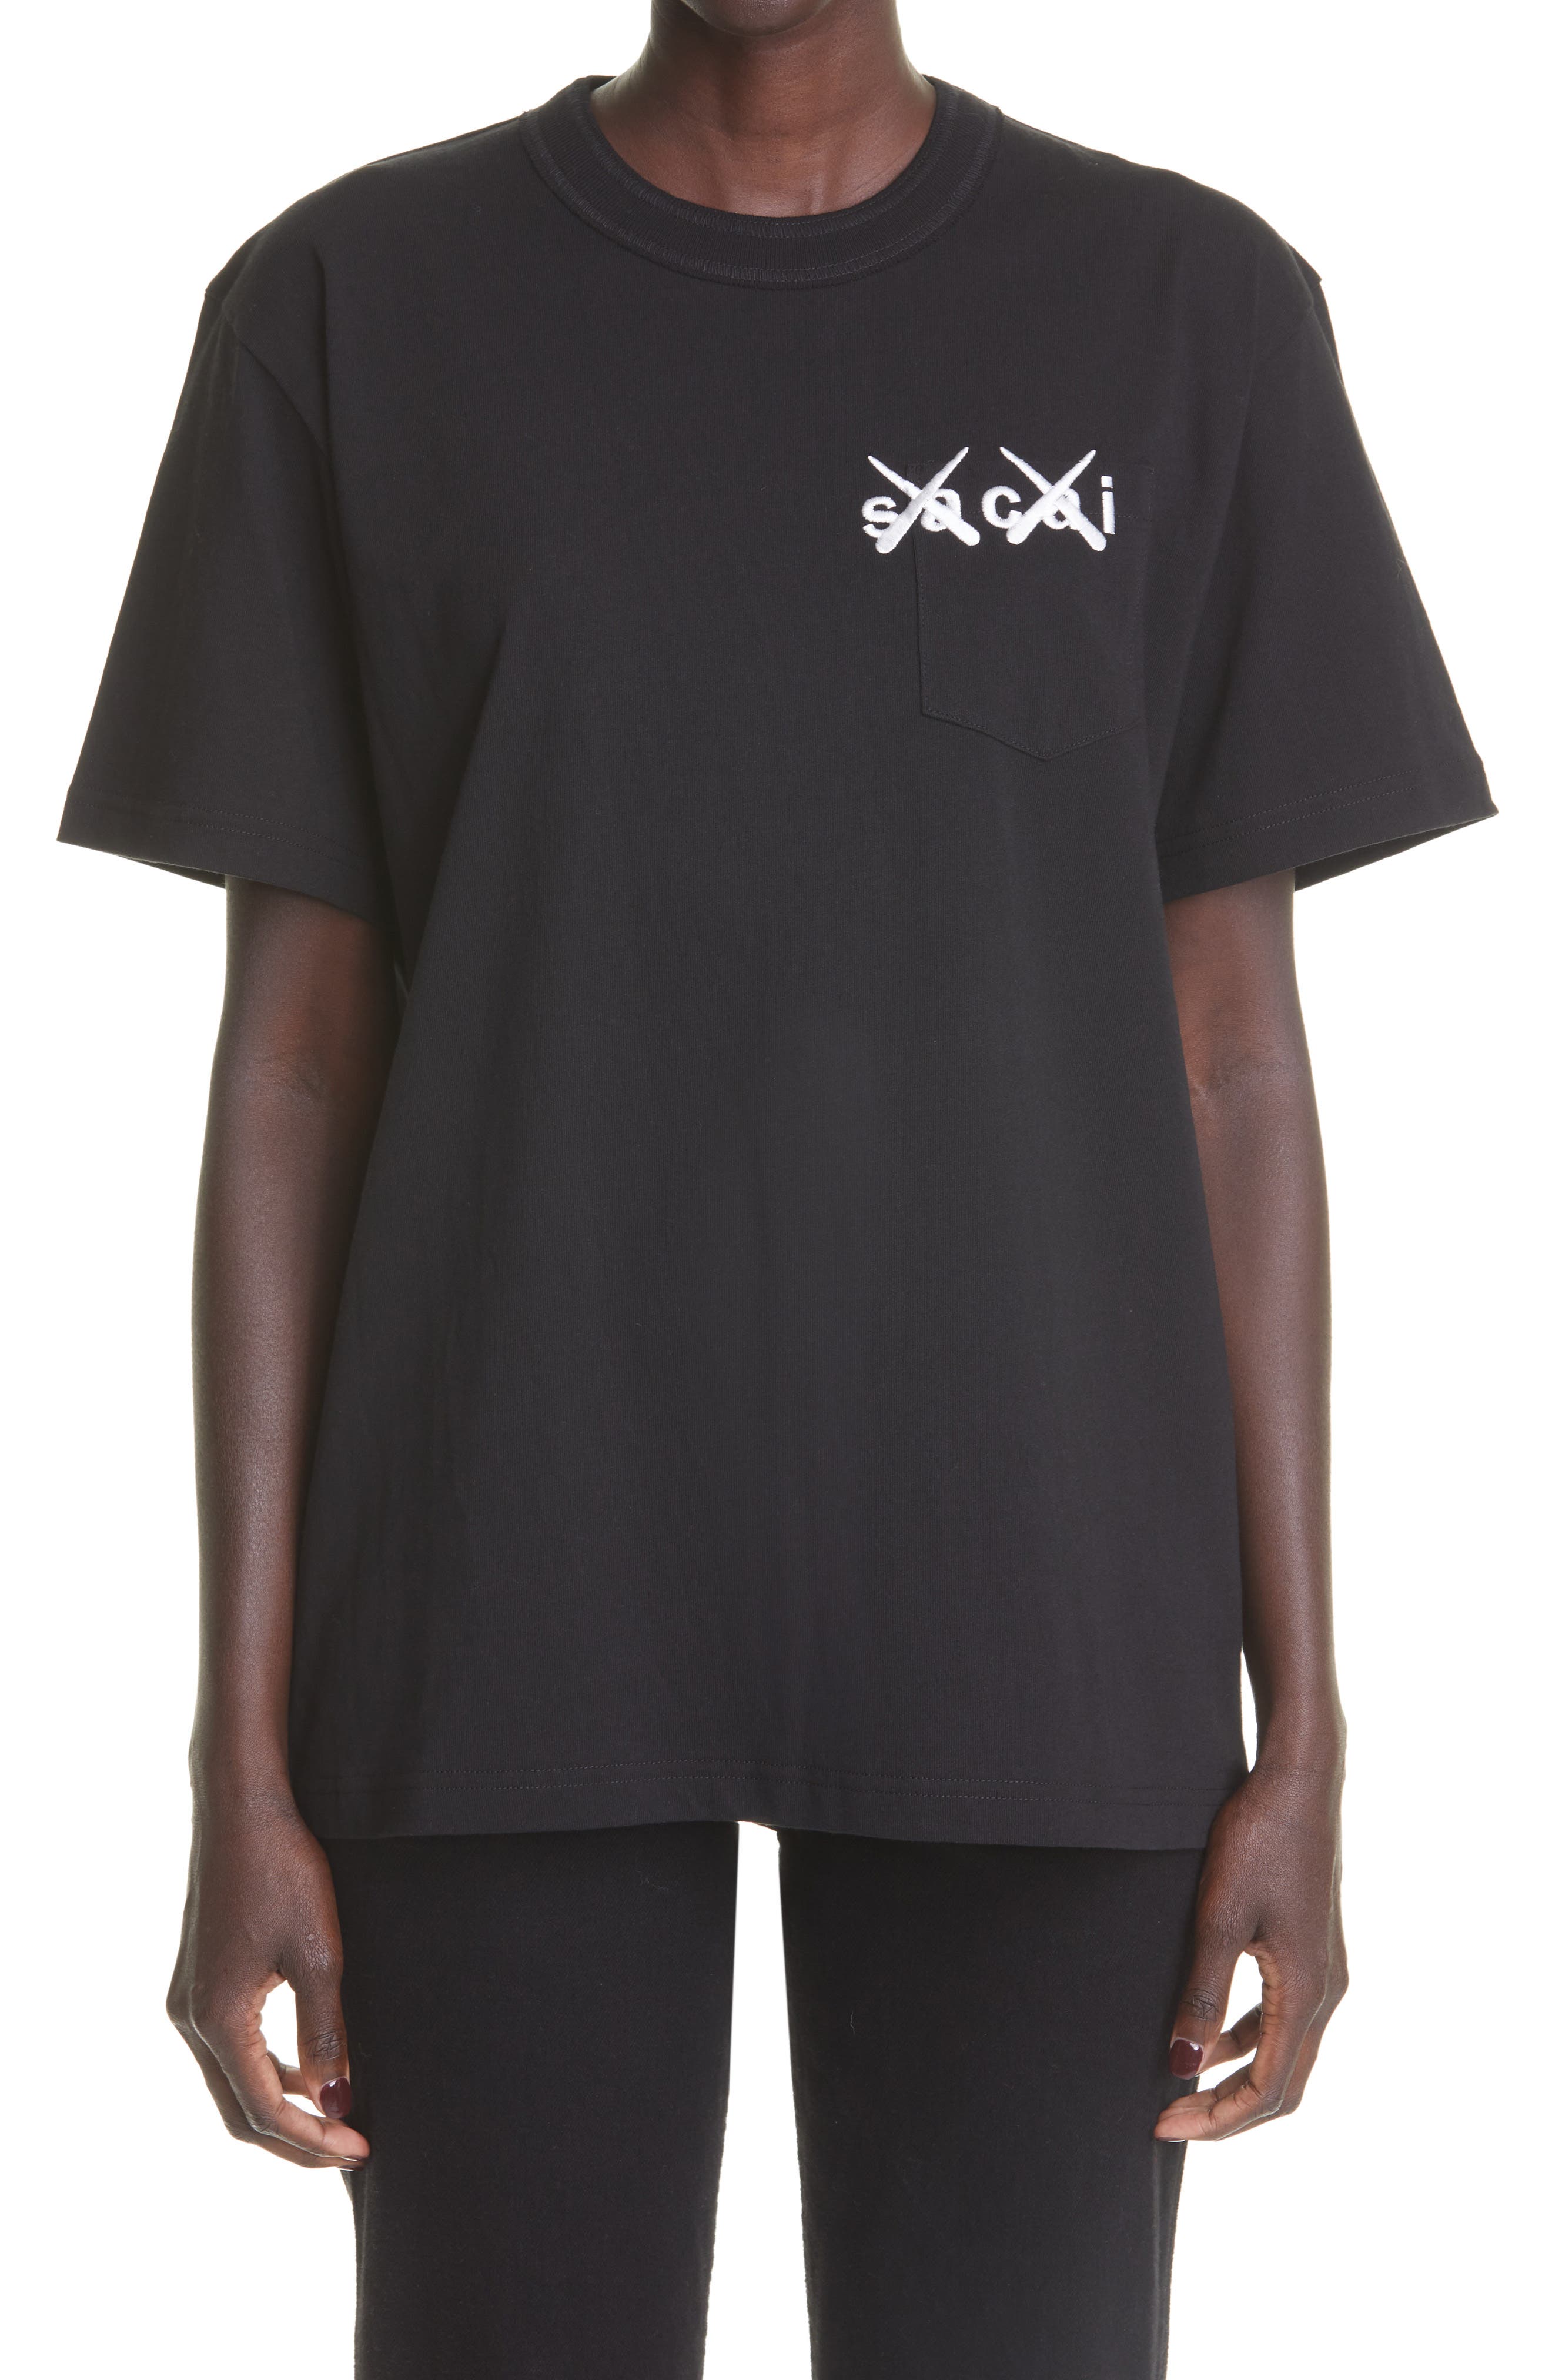 Sacai x KAWS Graffiti Tag Embroidered T-Shirt in Black/White at Nordstrom, Size 2